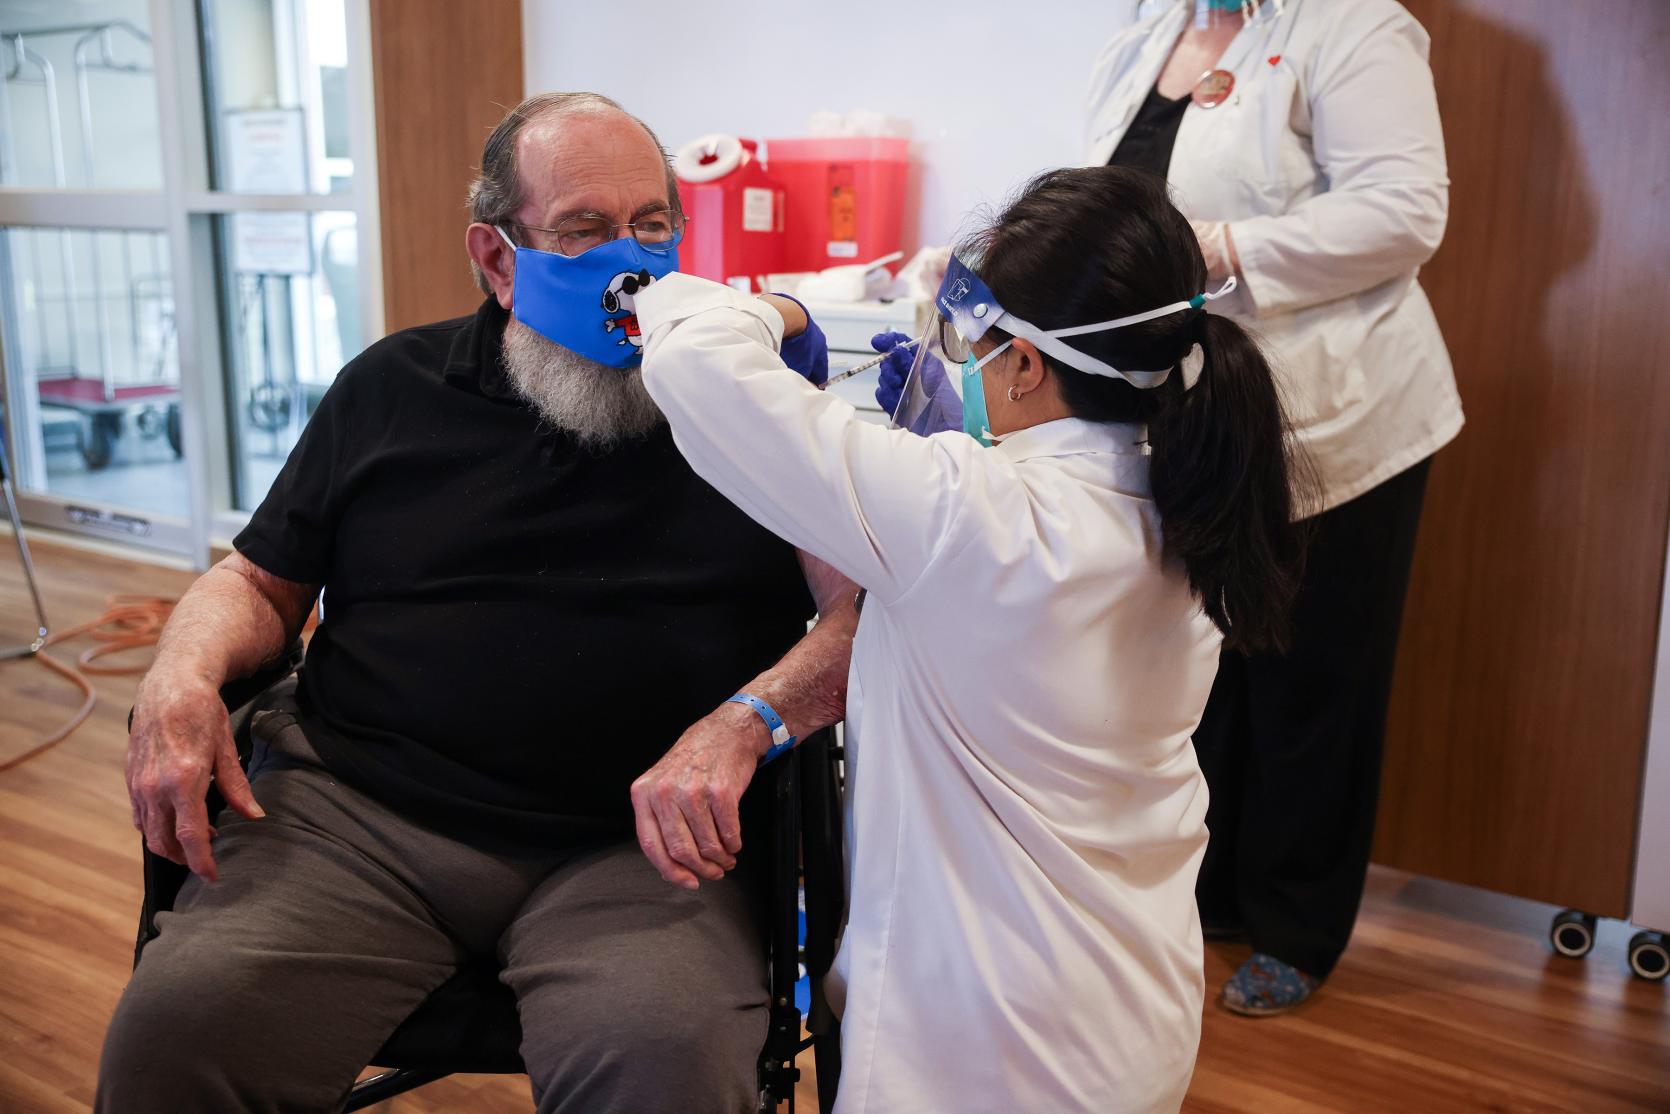 Robert Aucoin, 78, a U.S. Air Force veteran and resident at the Soldiers’ Home in Holyoke, receiving the first COVID-19 vaccine at the Home. Photo credit: Leon Nguyen/The Springfield Republican